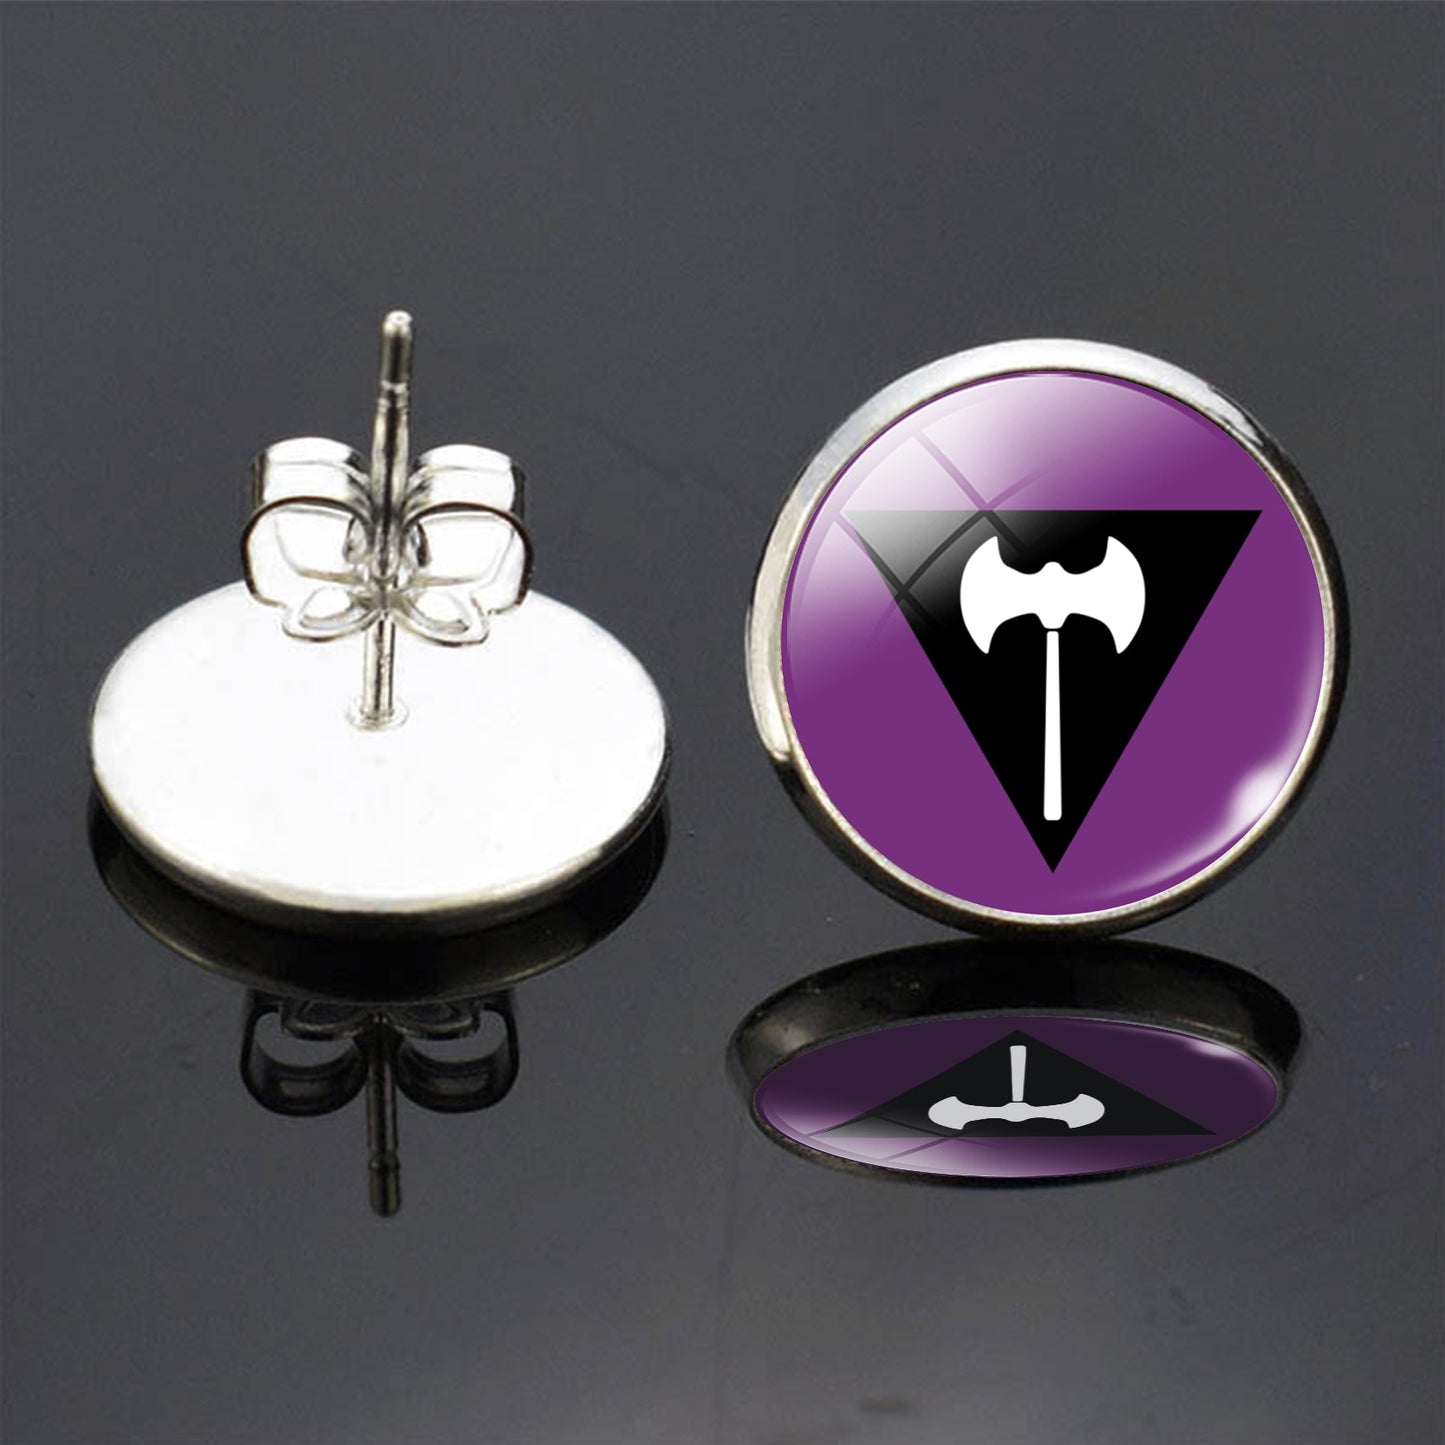  Labrys pride flag round post earring,one earring showing post other showing  Labrys  design